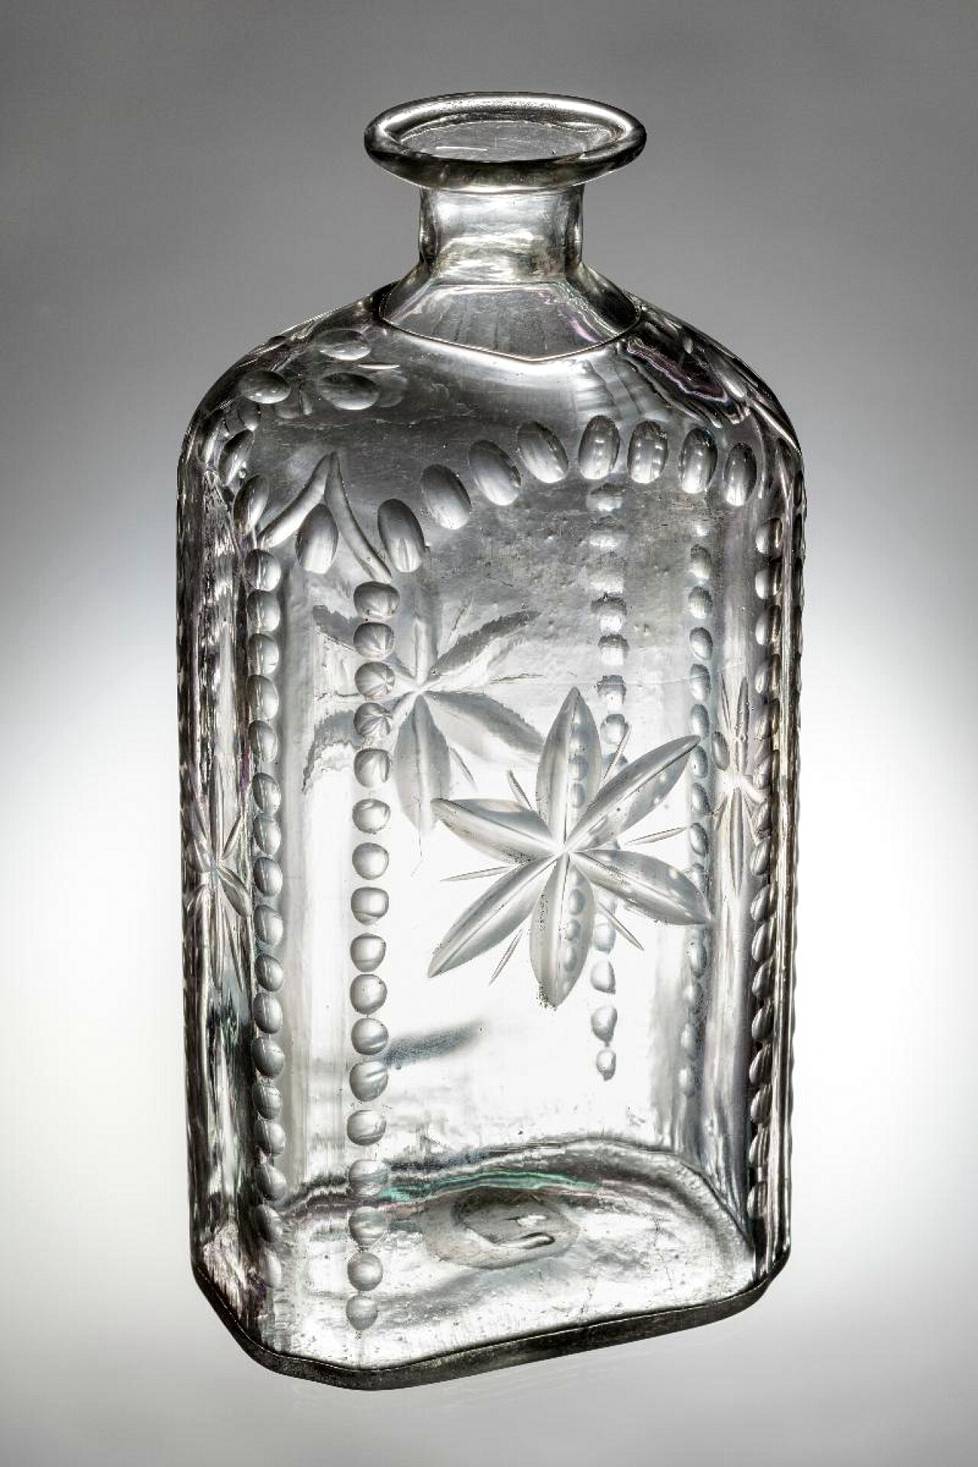 Decorative bottle of liquor from the 18th century.